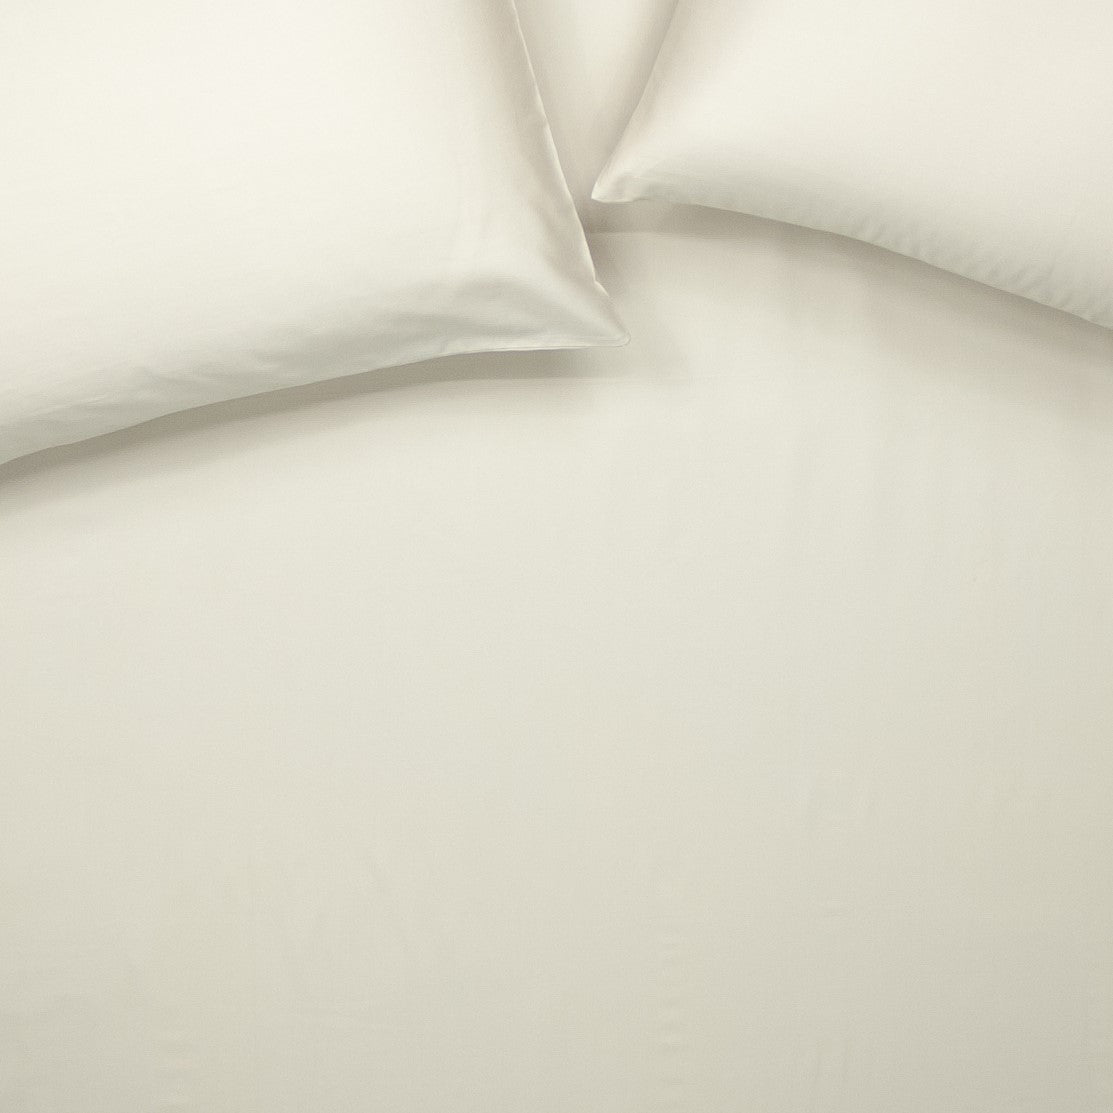 Birds eye view of organic cotton fitted sheet with pillowcases in egg shell white